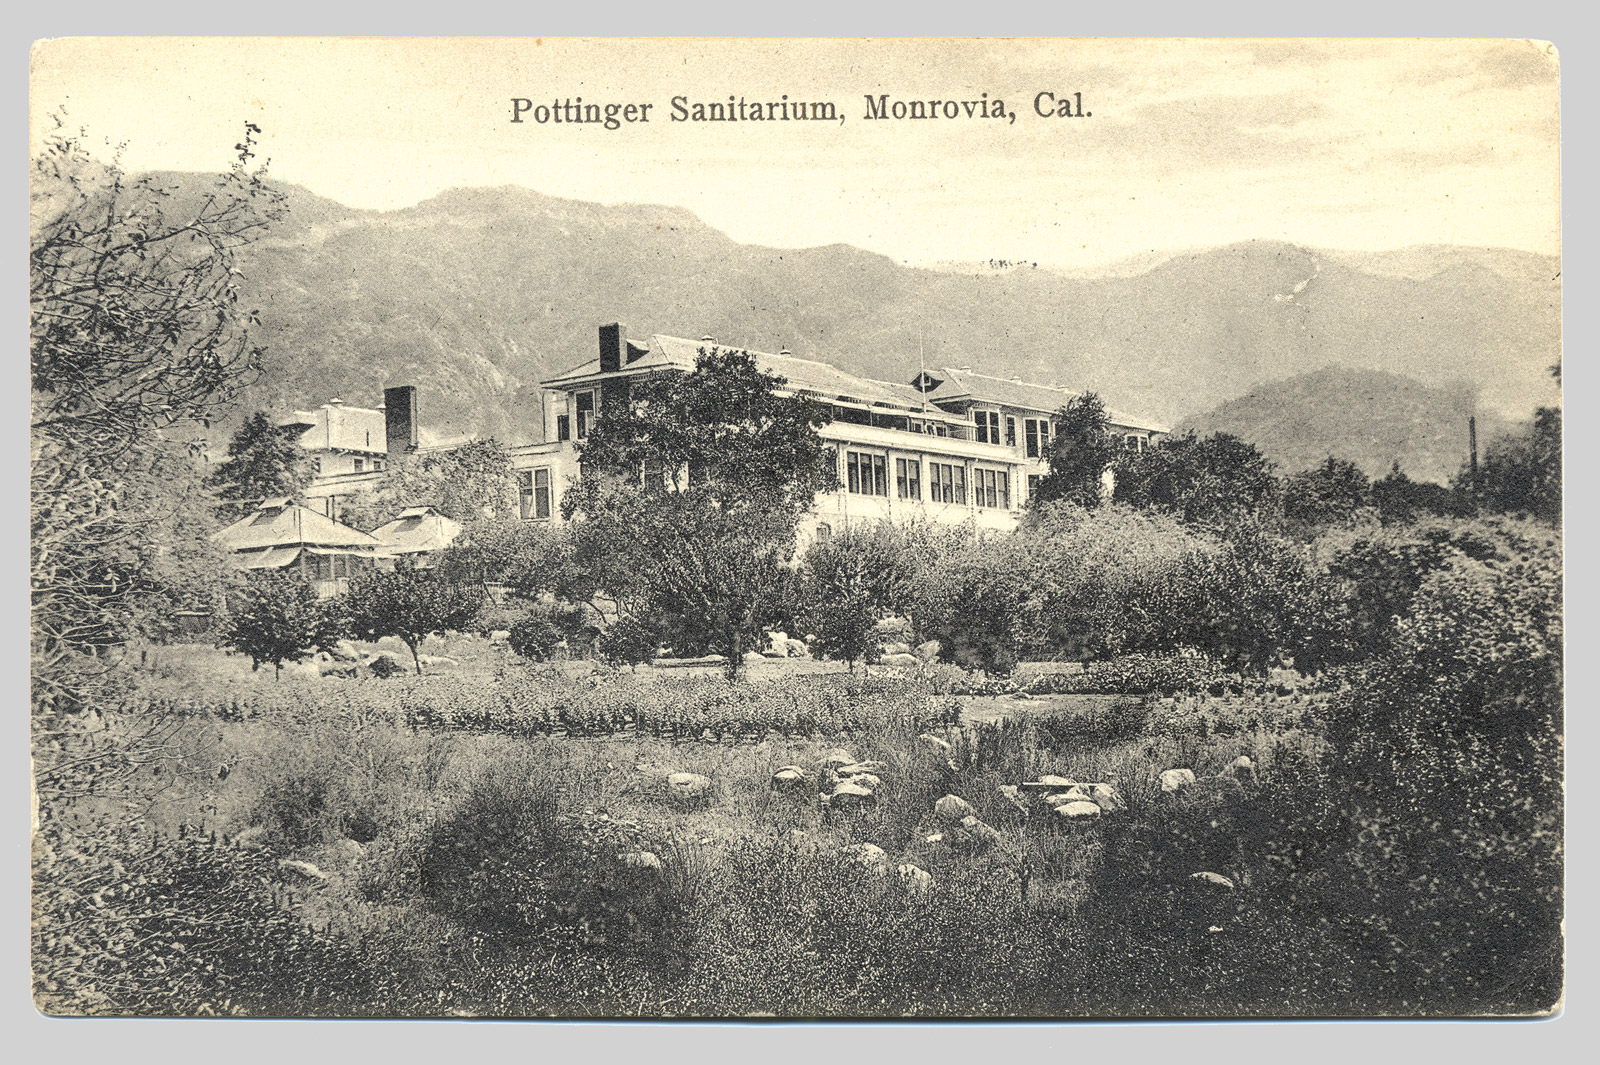 Pottenger Sanatorium, ca. 1923. Note that both parts of the institution’s name were misspelled by the issuing postcard company. Courtesy California State Library.